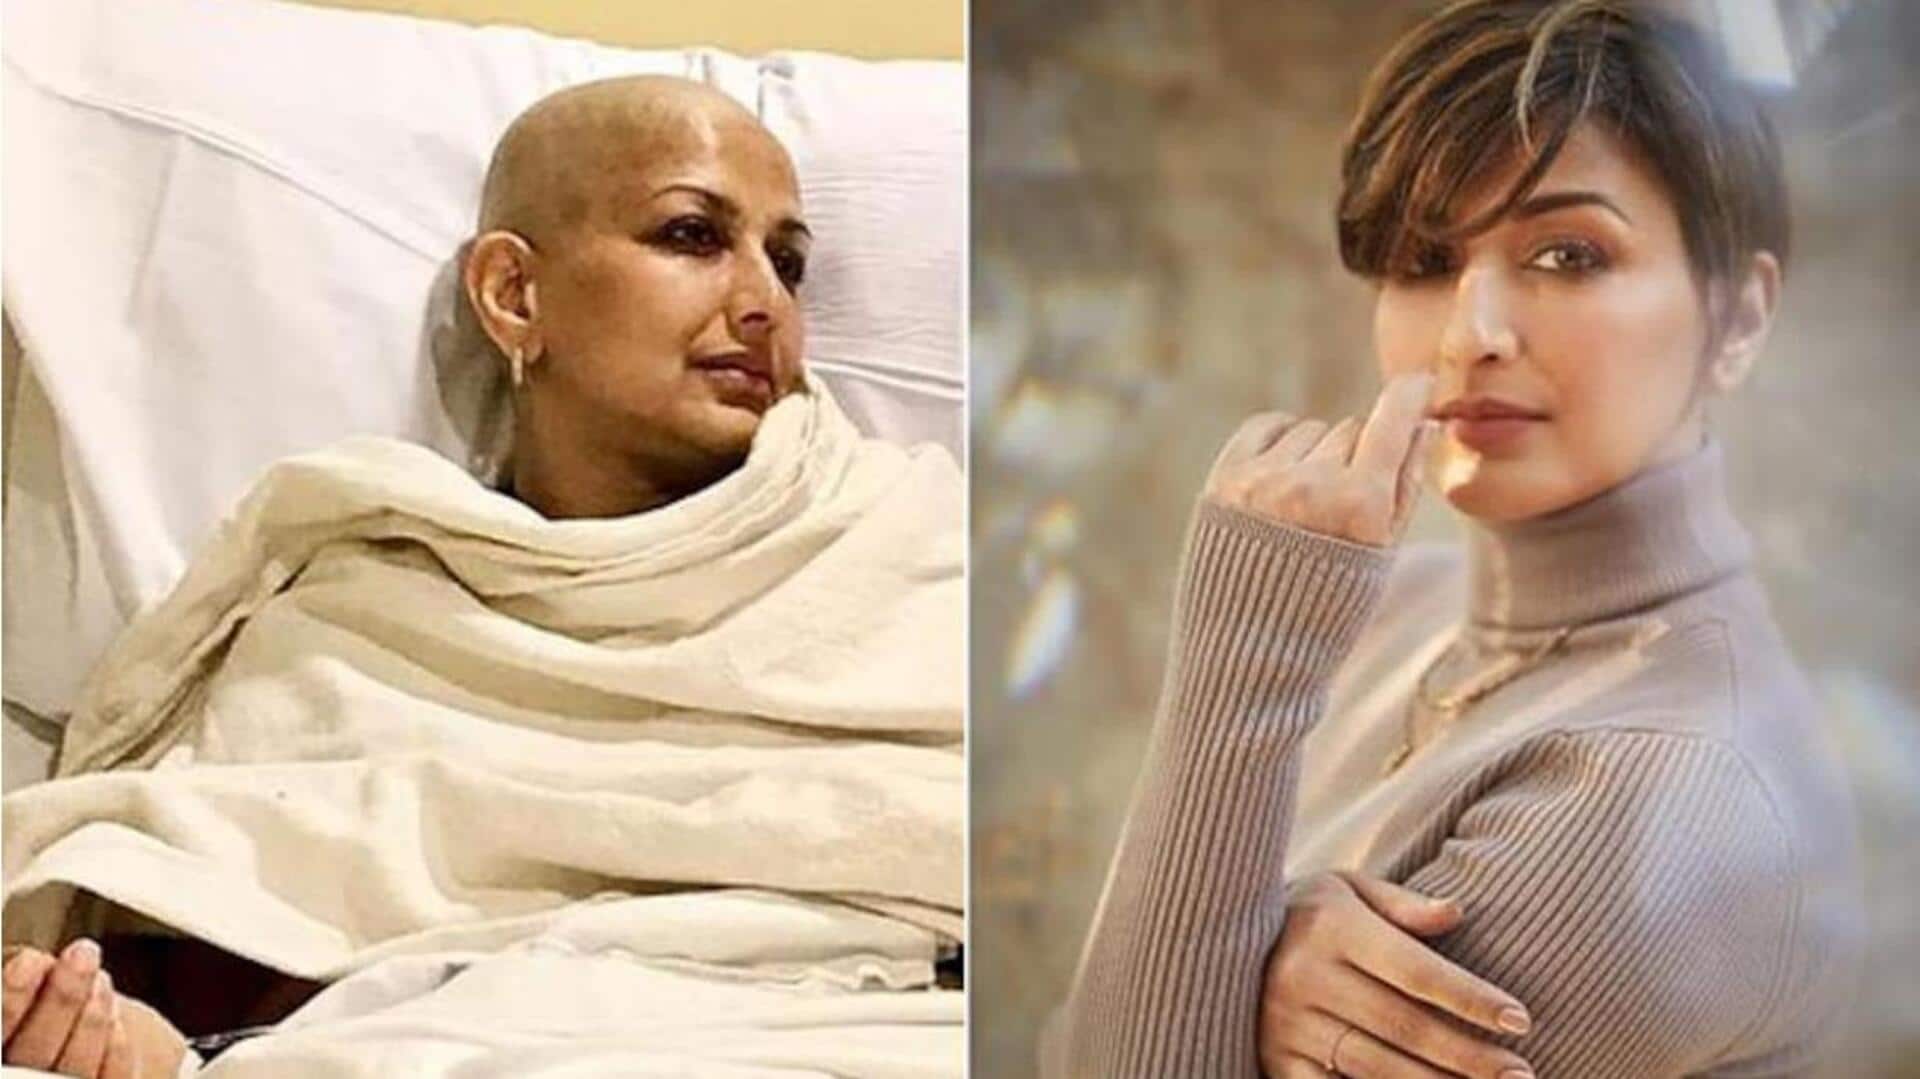 'Why me?': Sonali Bendre reveals first thoughts after cancer diagnosis